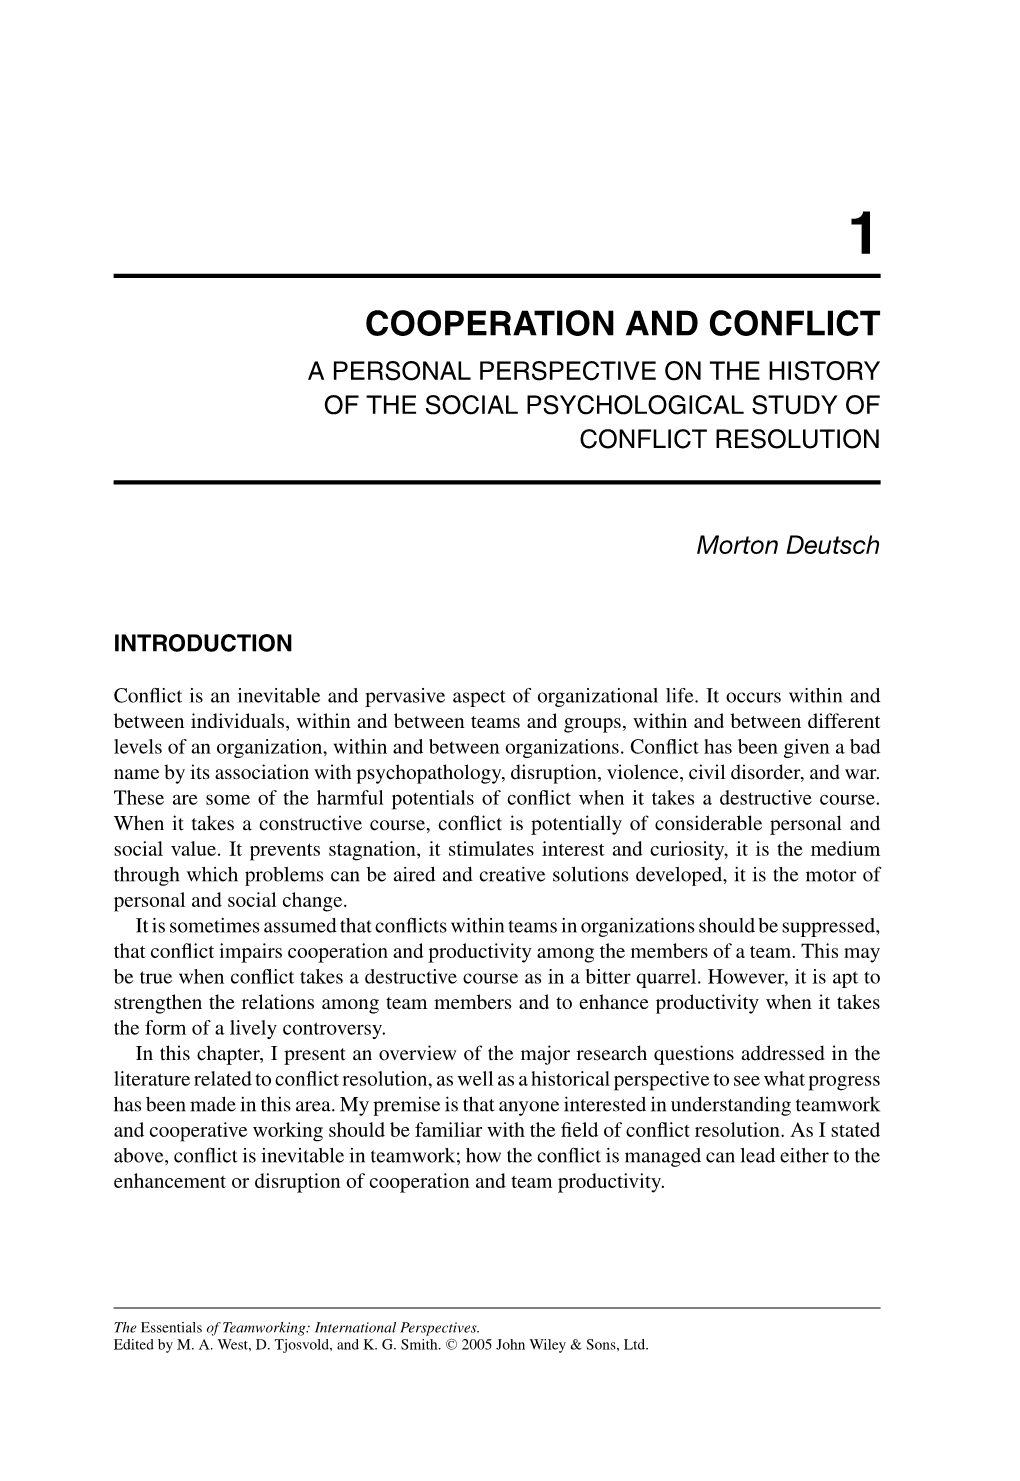 Cooperation and Conflict a Personal Perspective on the History of the Social Psychological Study of Conflict Resolution